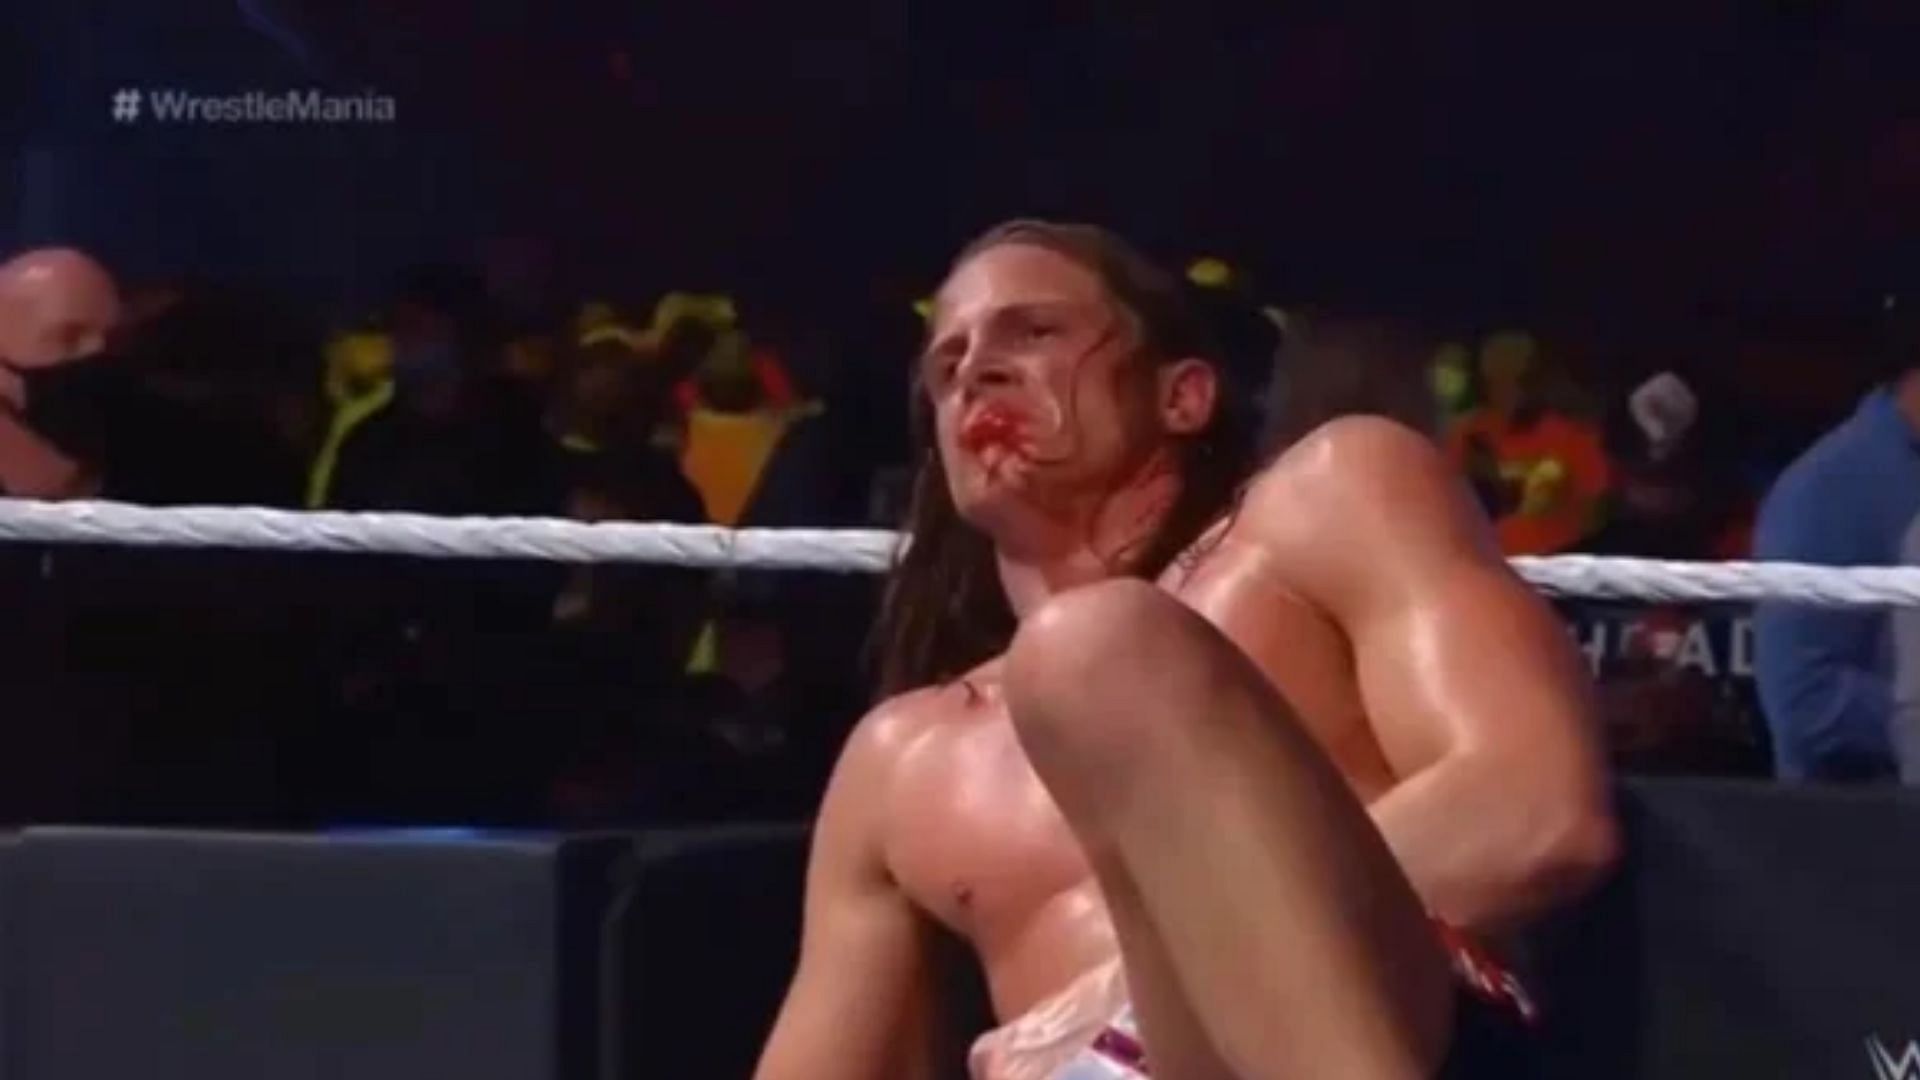 Matt Riddle is one of the top names in WWE